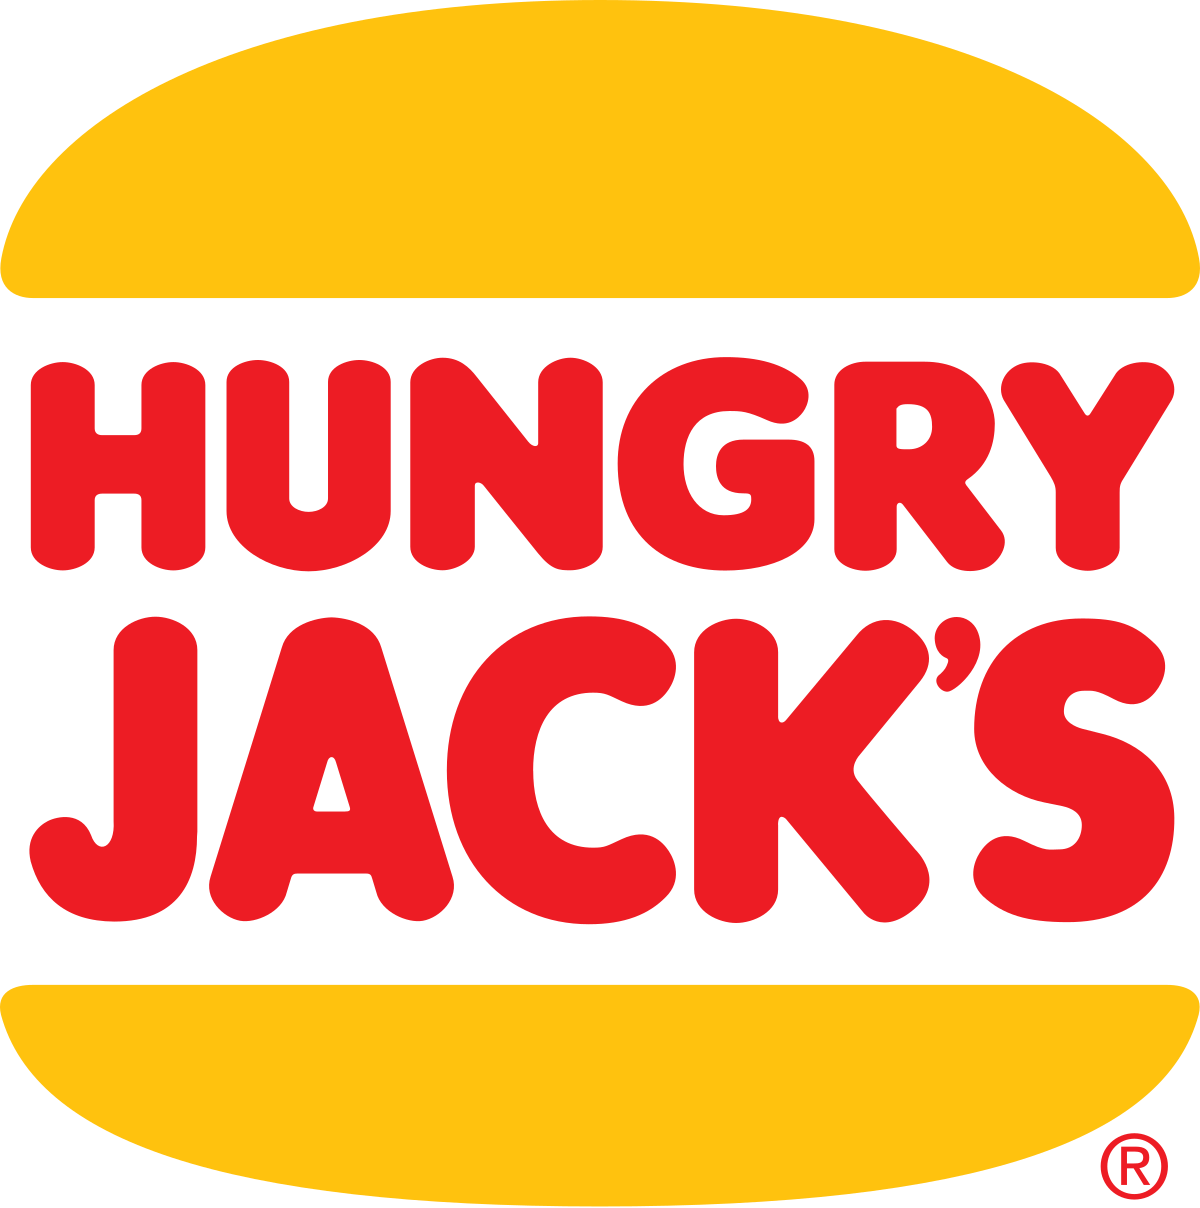 hungry clipart logo